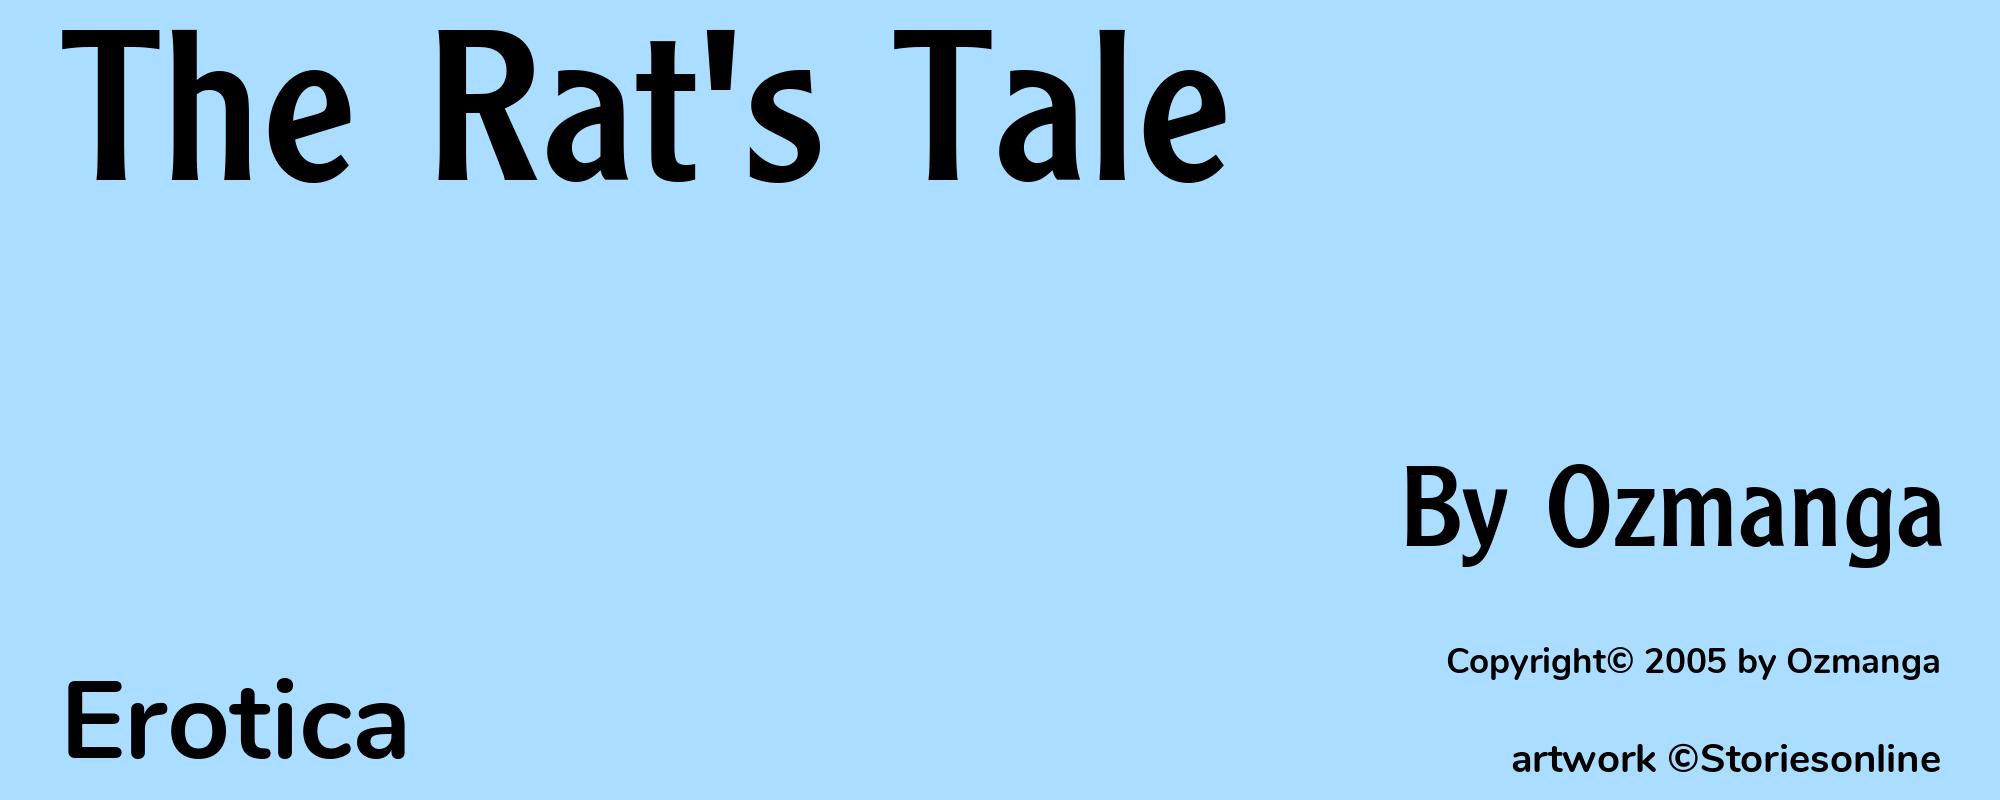 The Rat's Tale - Cover